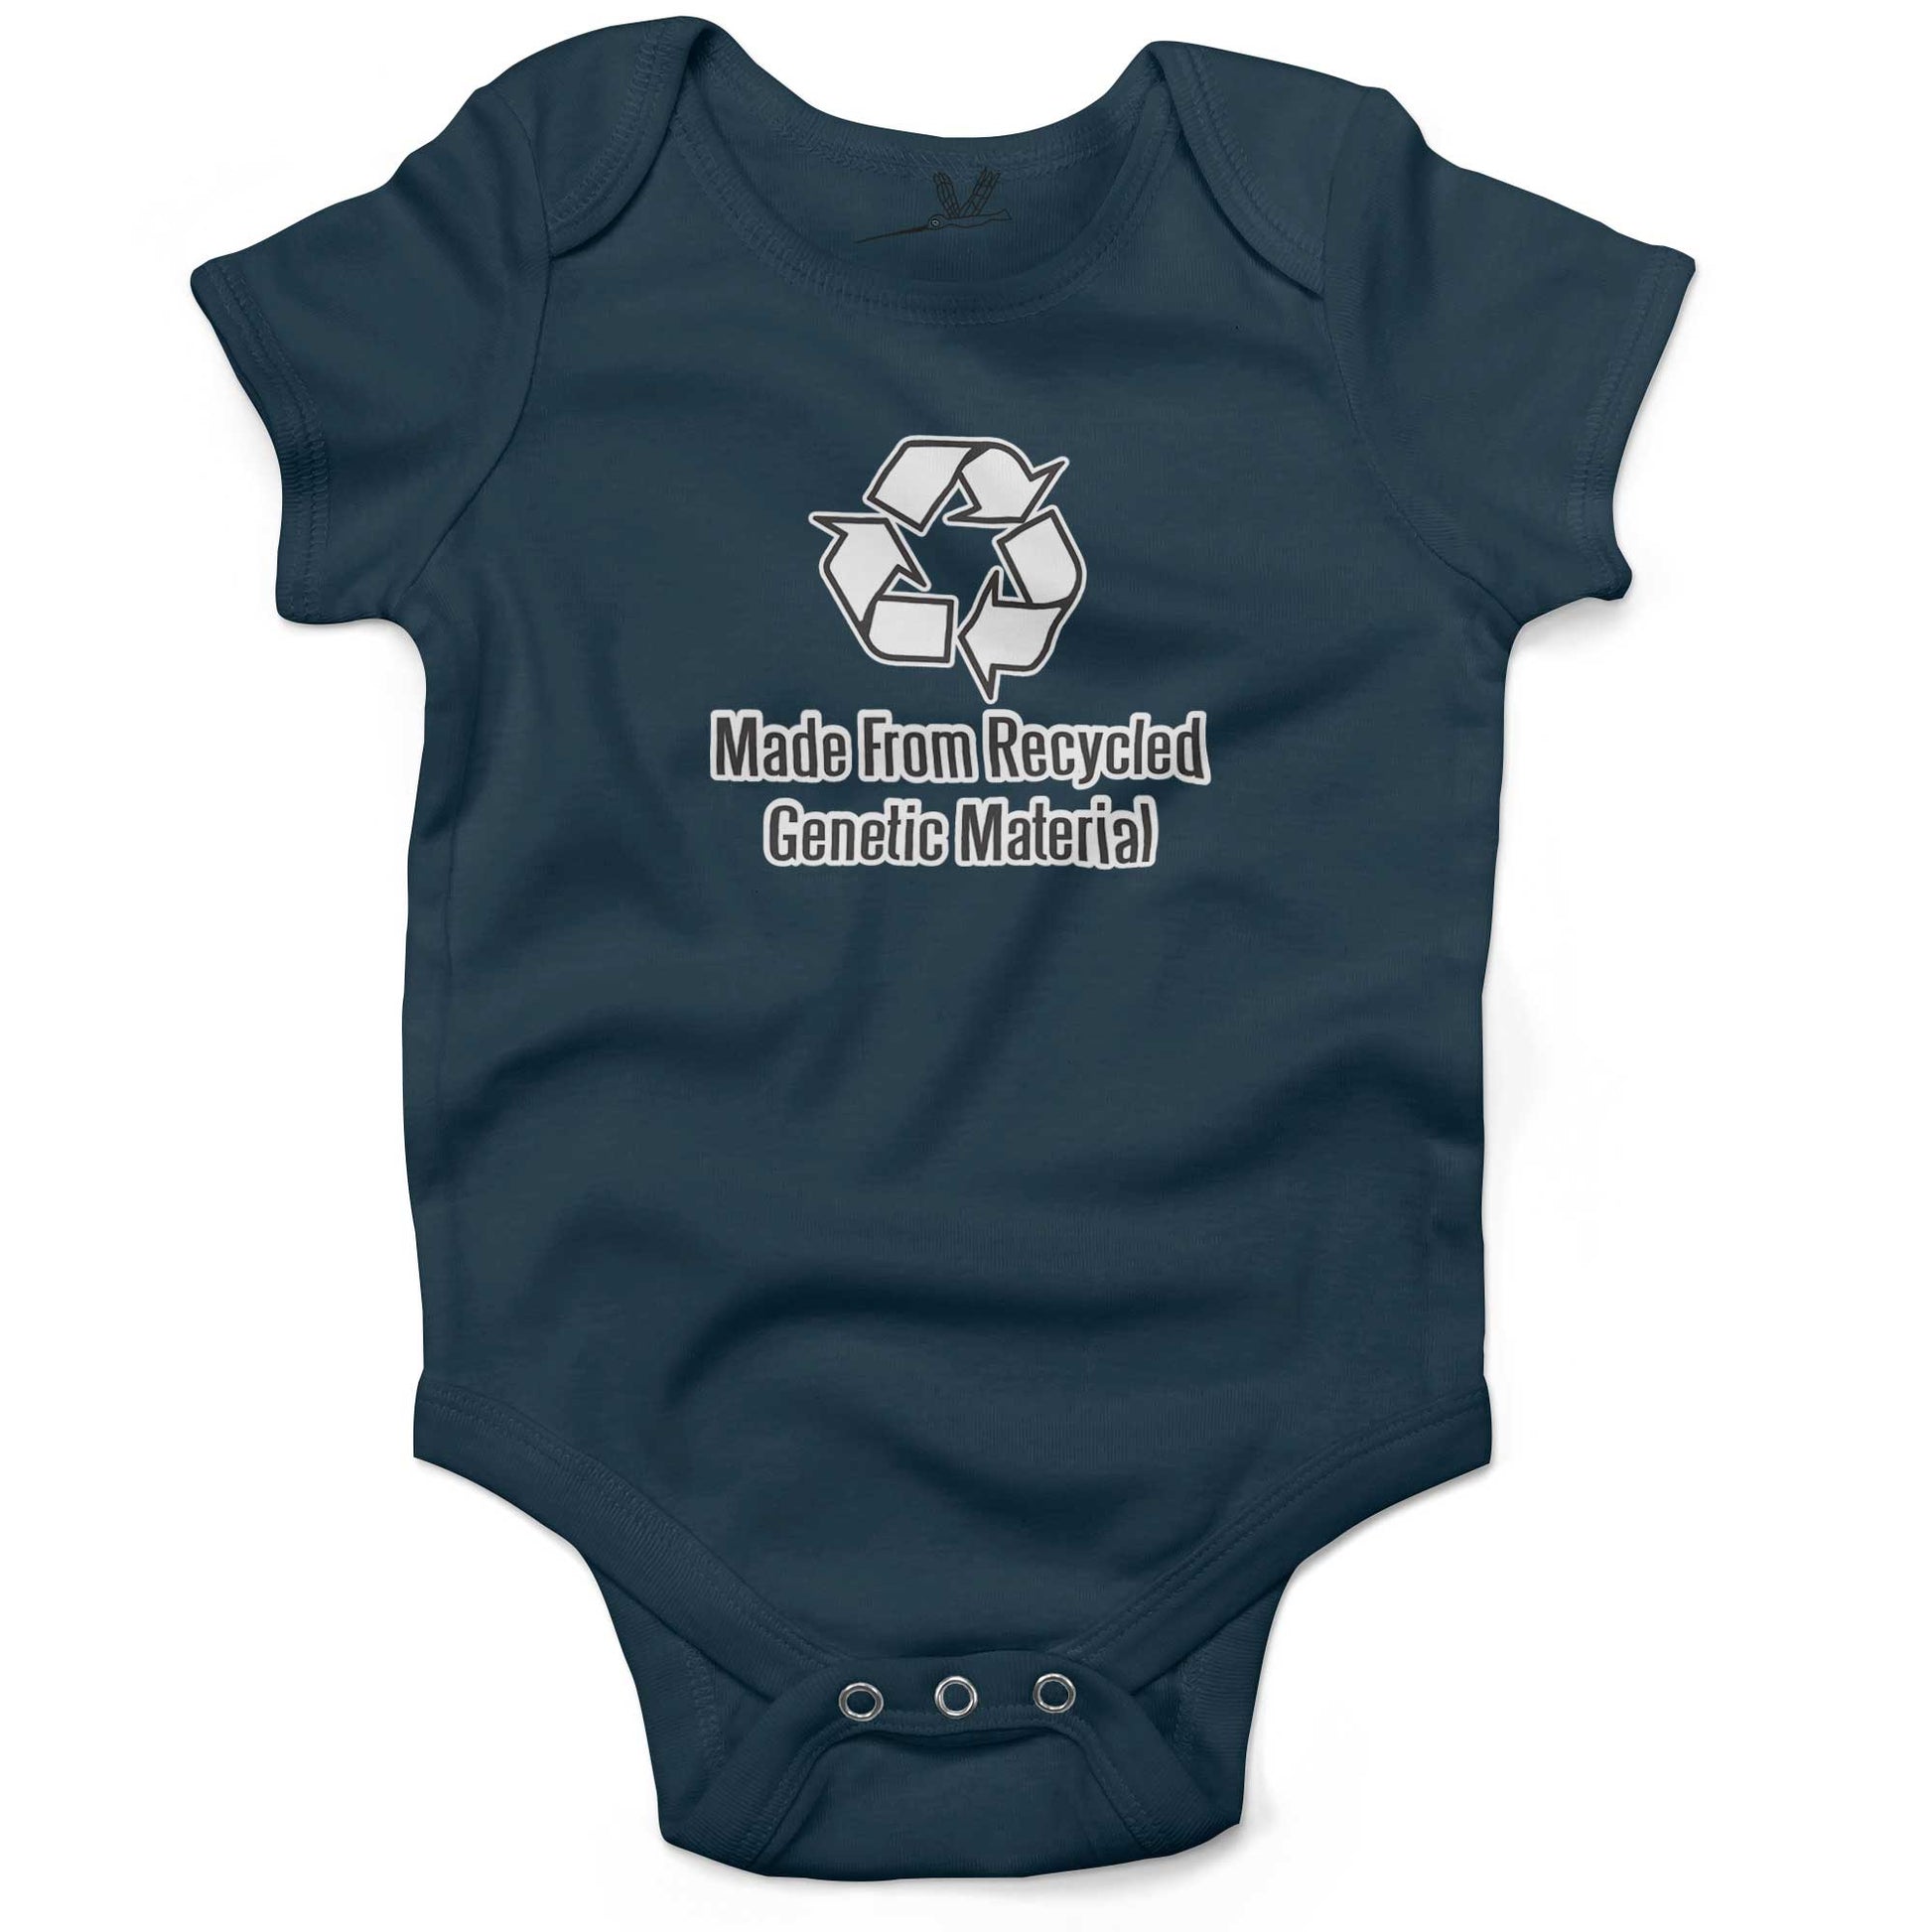 Made From Recycled Materials Infant Bodysuit or Raglan Baby Tee-Organic Pacific Blue-3-6 months